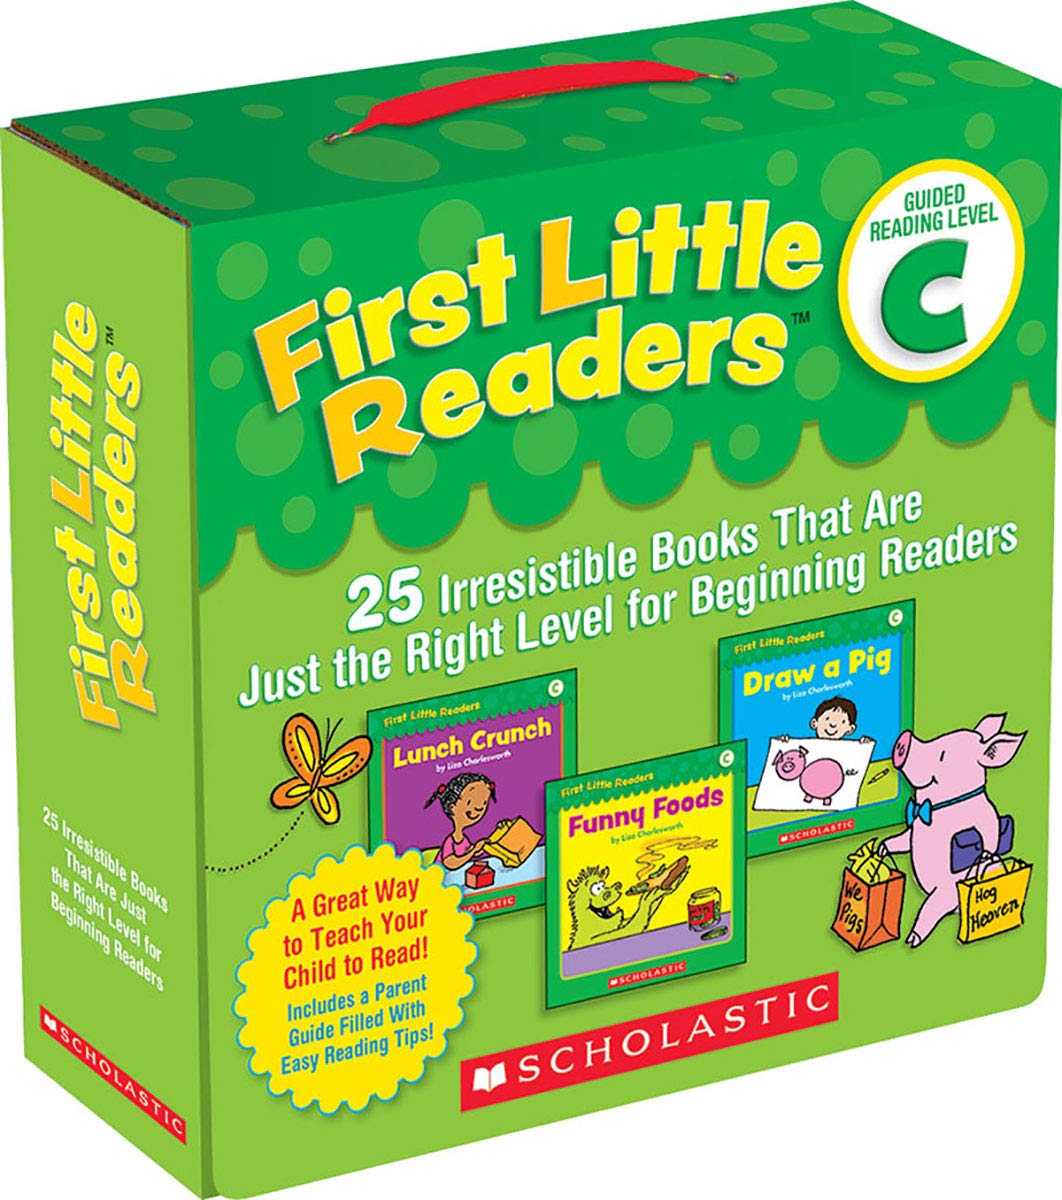 First Little Readers Guided Reading, Level C